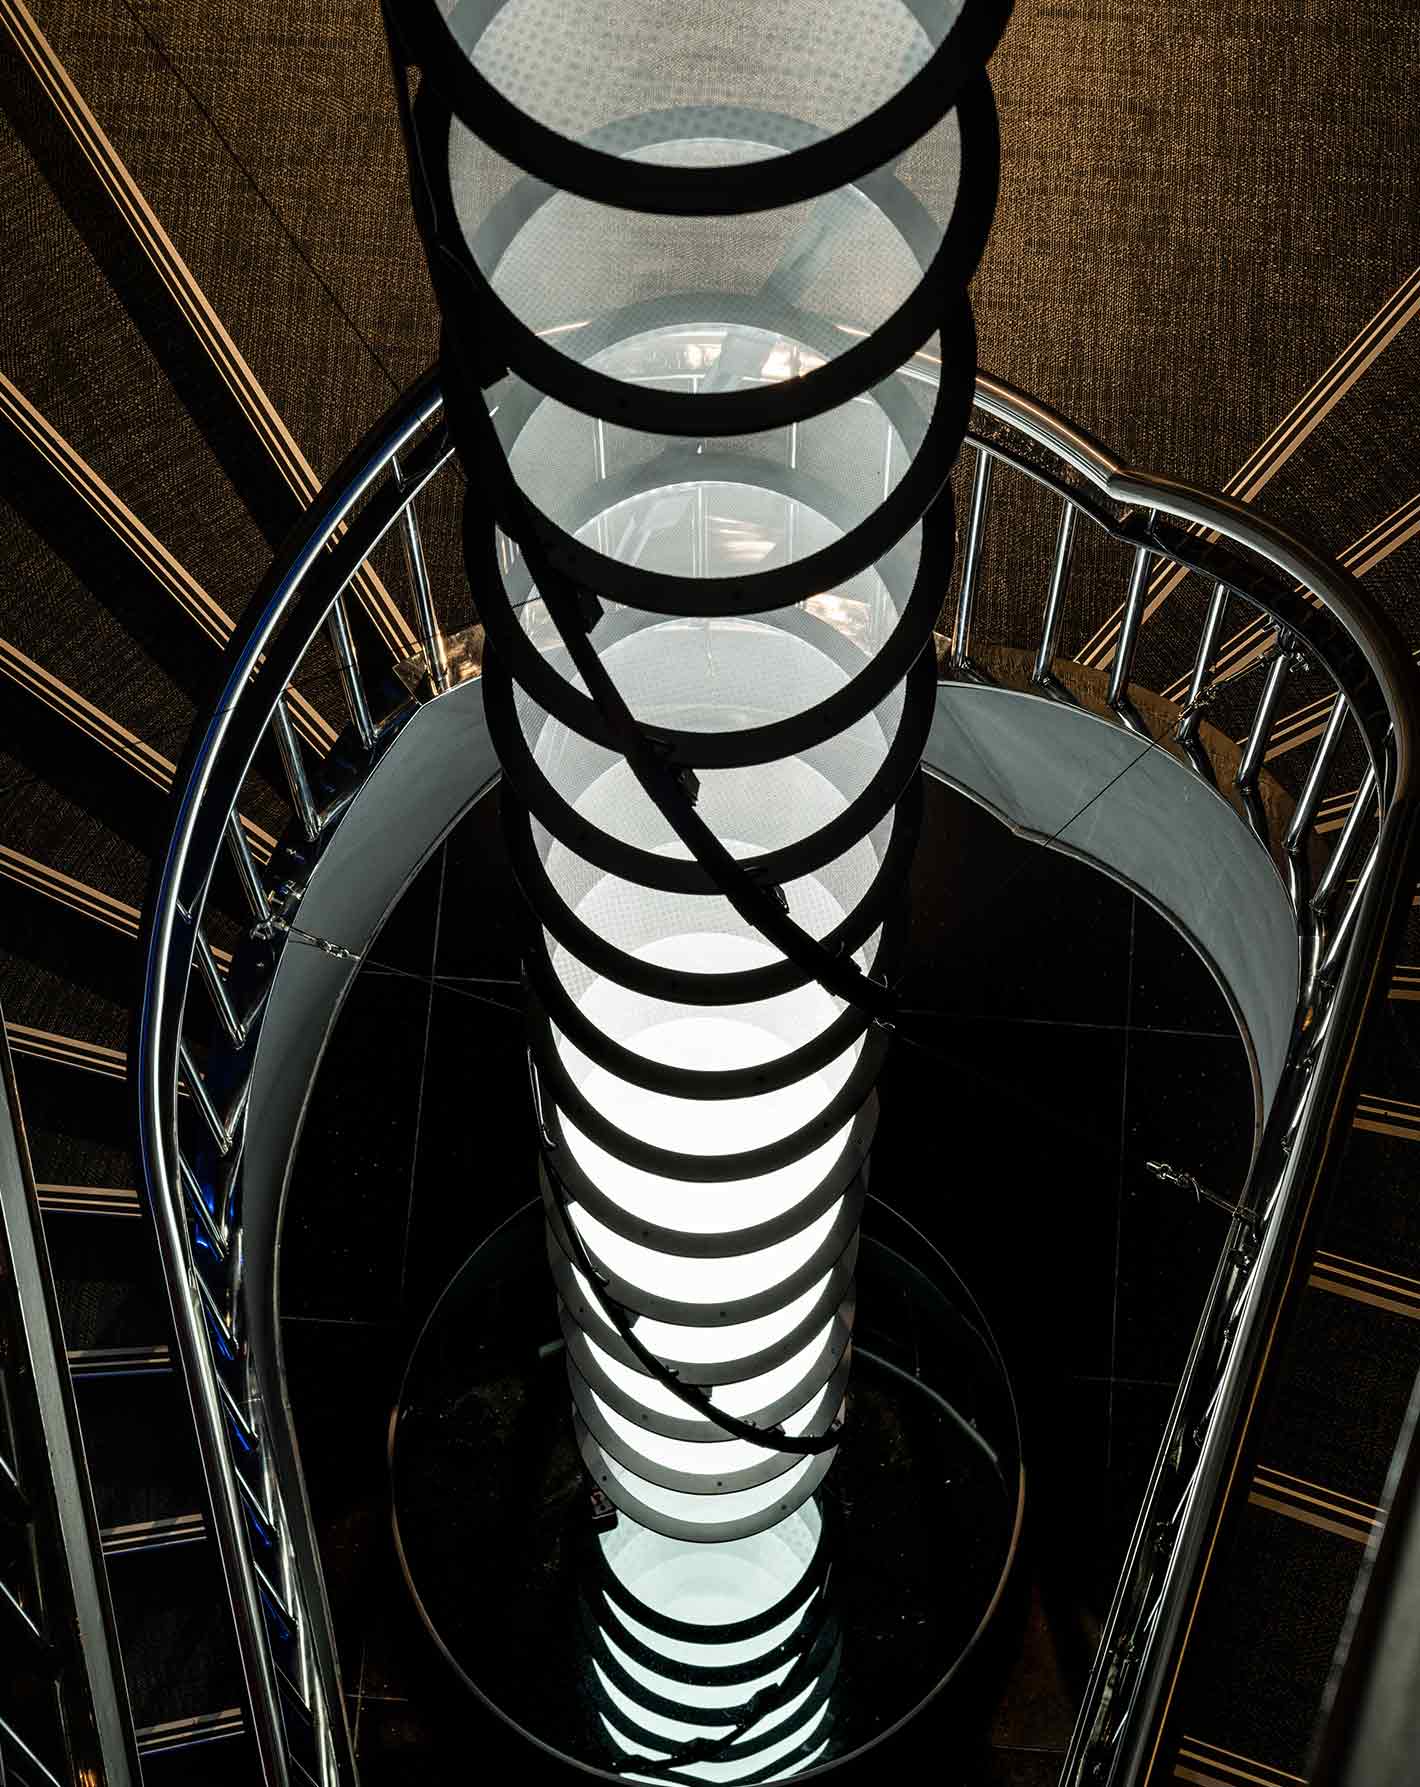 Stairwell Lighting Installation Pulsating Sequence Illuminated Circular Panels Helix Structure Park Row Soho Nulty Bespoke